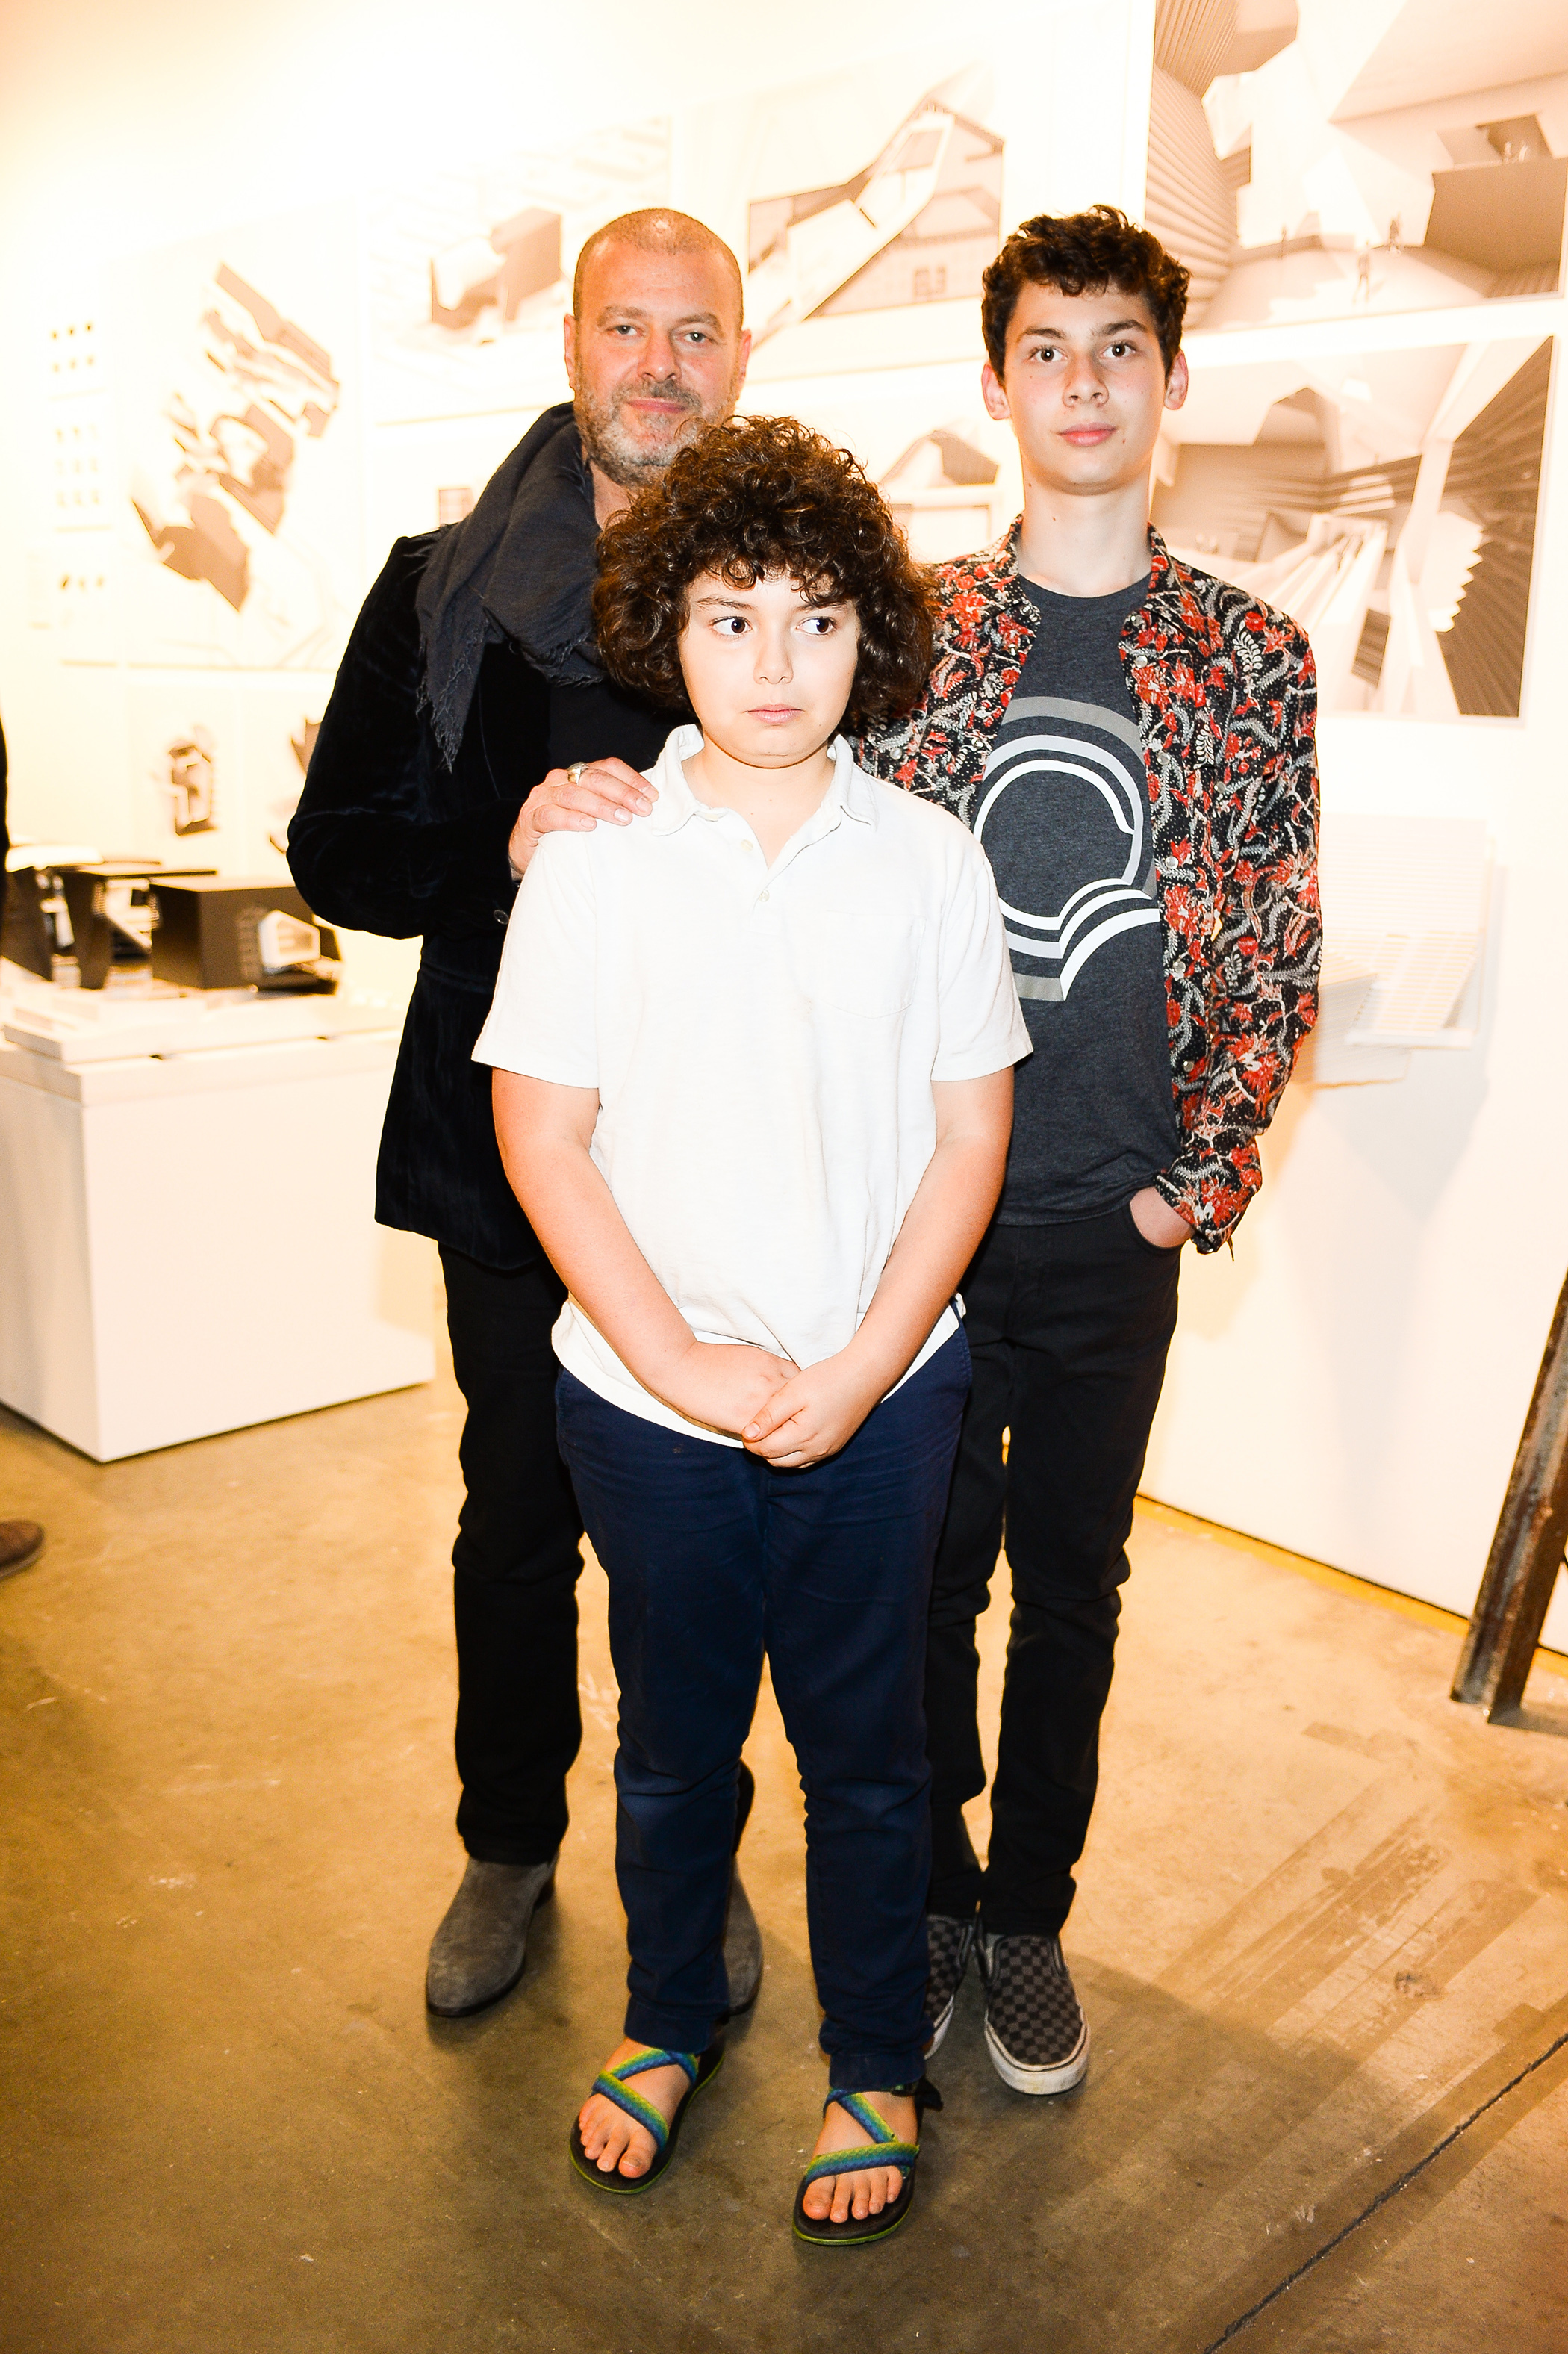 A man and two boys stand and pose for a photo together.